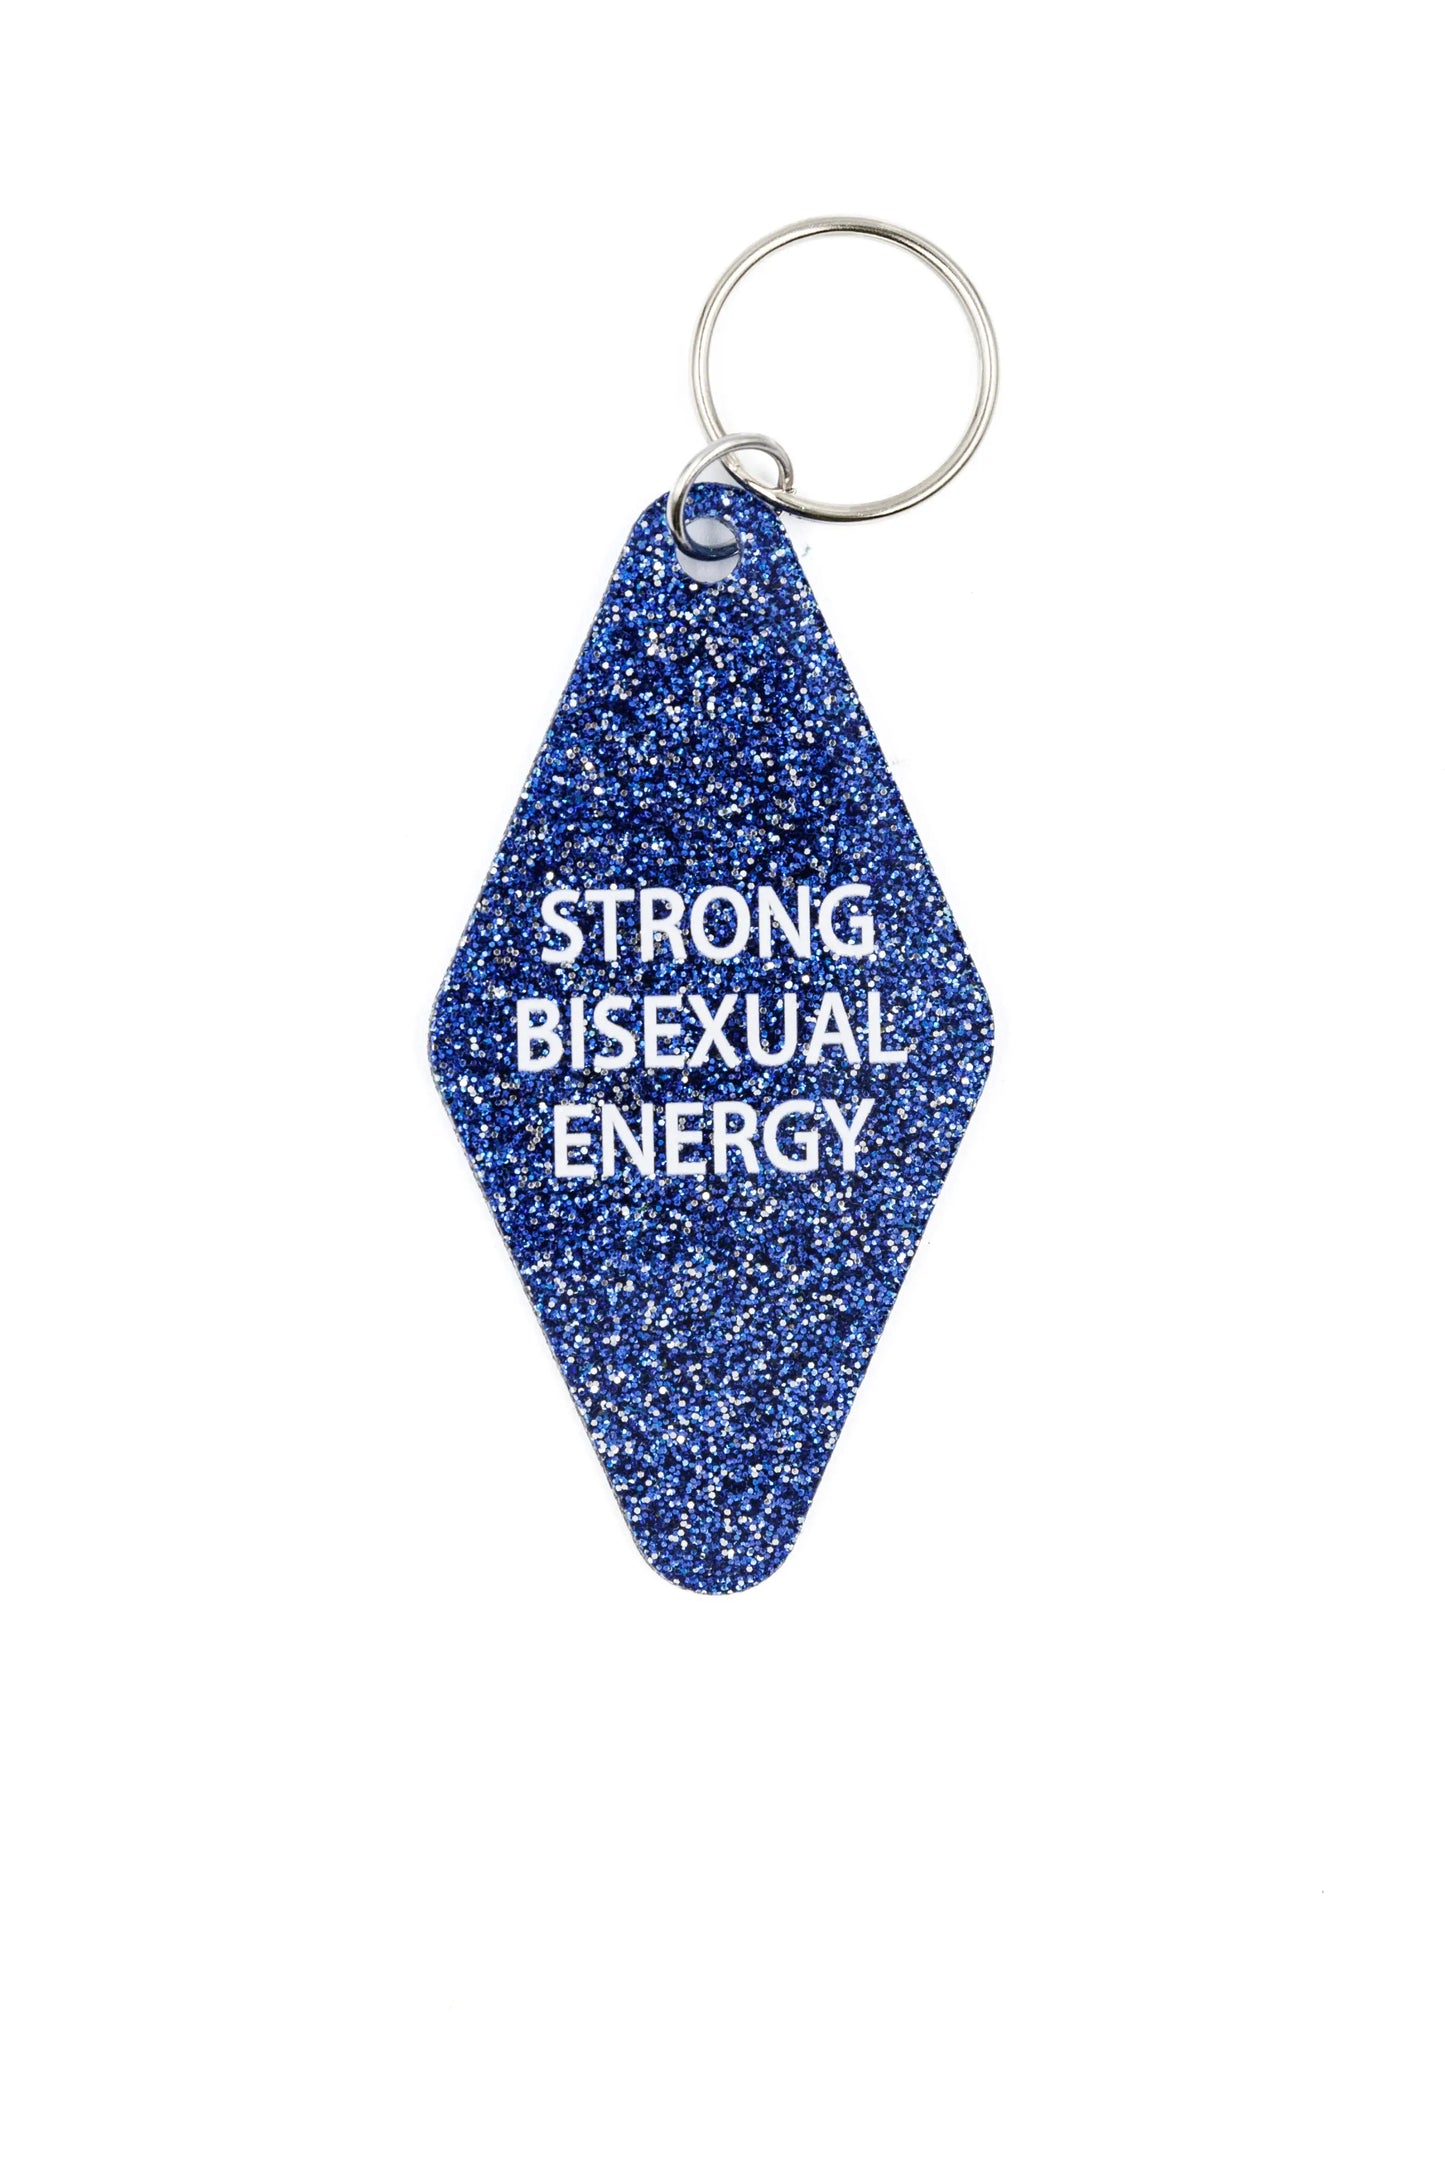 Strong Bisexual Energy Keychain